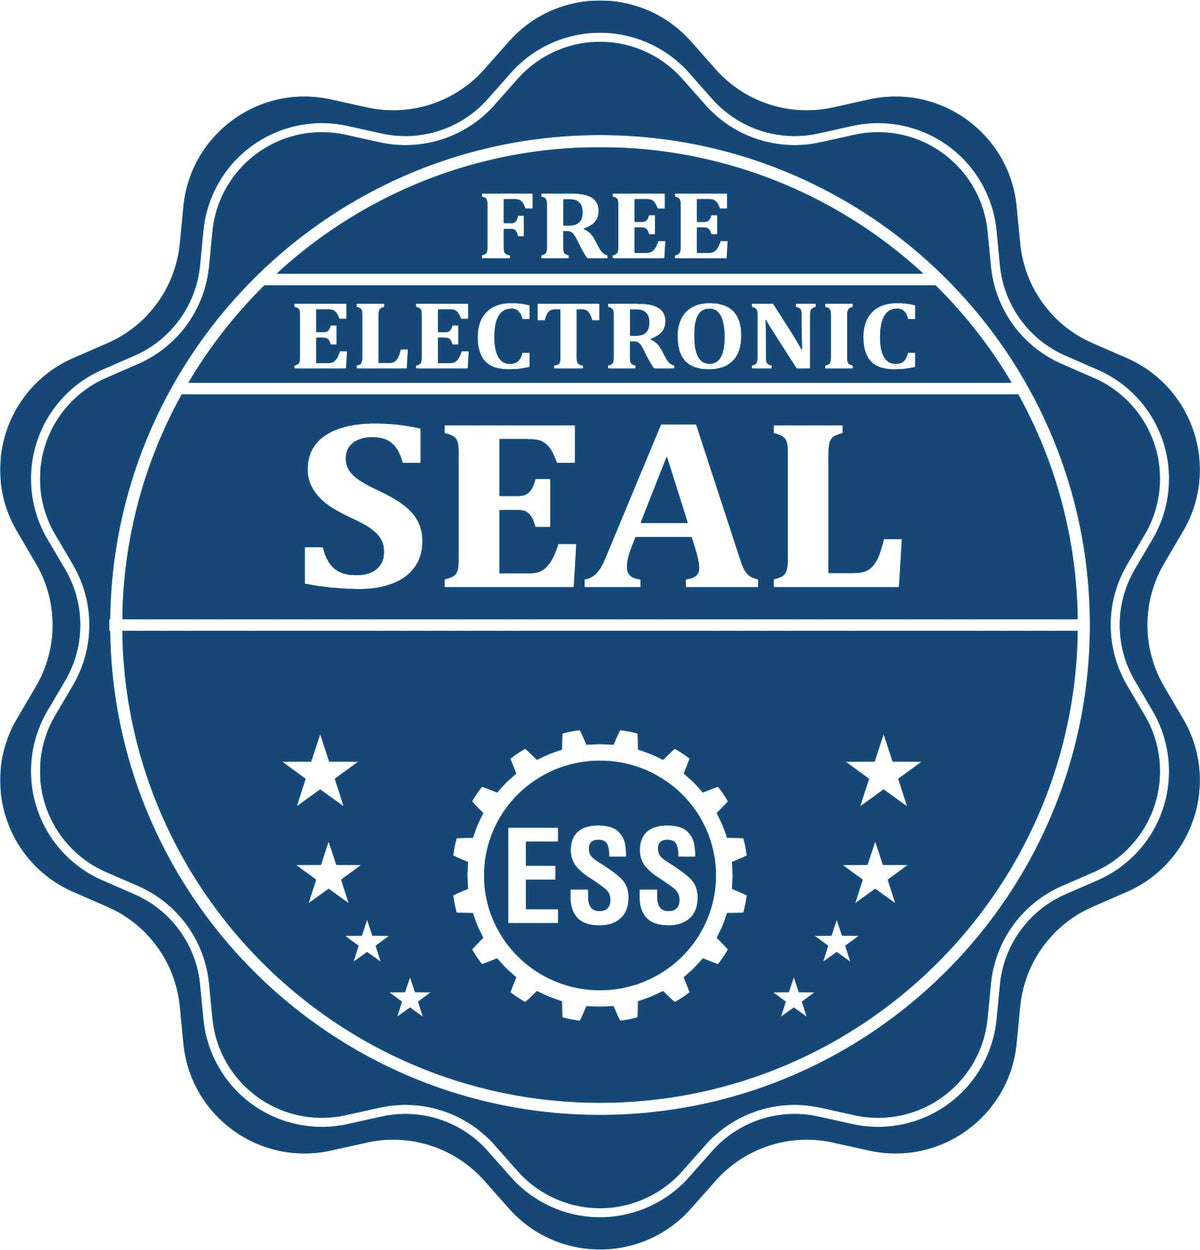 A badge showing a free electronic seal for the Maine Geologist Desk Seal with stars and the ESS gear on the emblem.